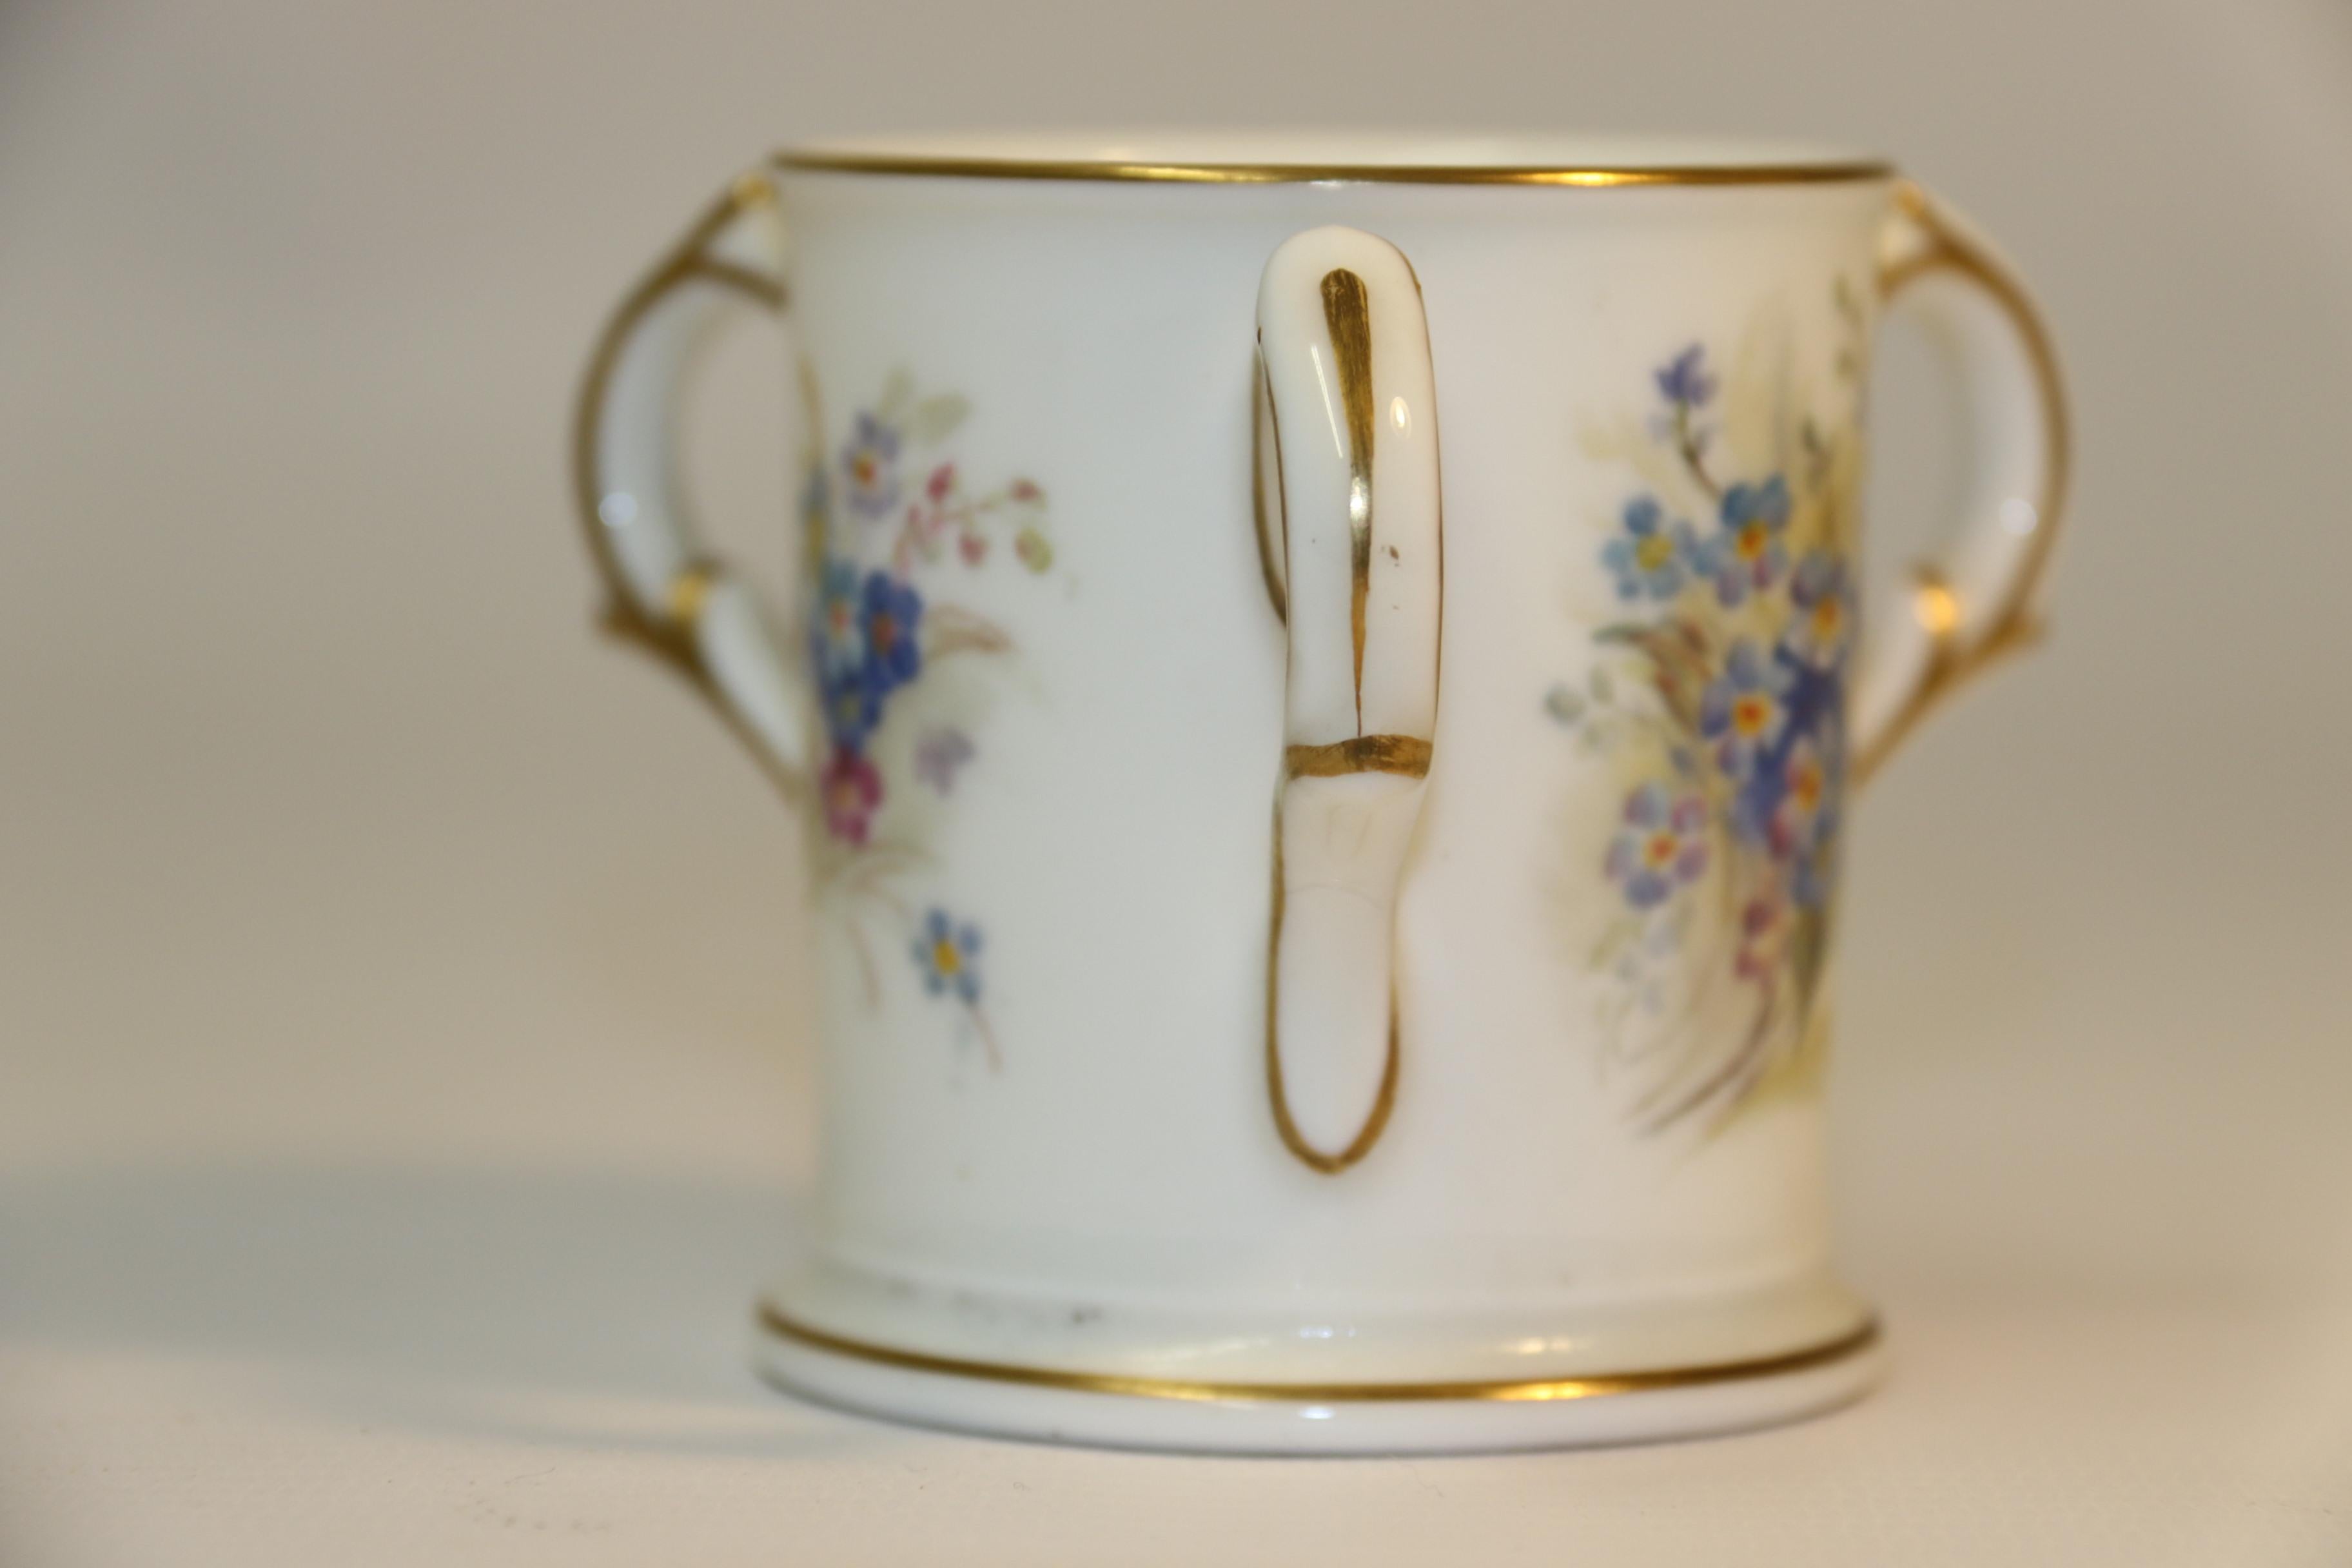 This delightful early 20th century Royal Worcester porcelain miniature loving cup has a white ground with fabulous hand painted sprays of forget-me-nots. These are centralised between the three handles which are decorated with gilt lines as is the